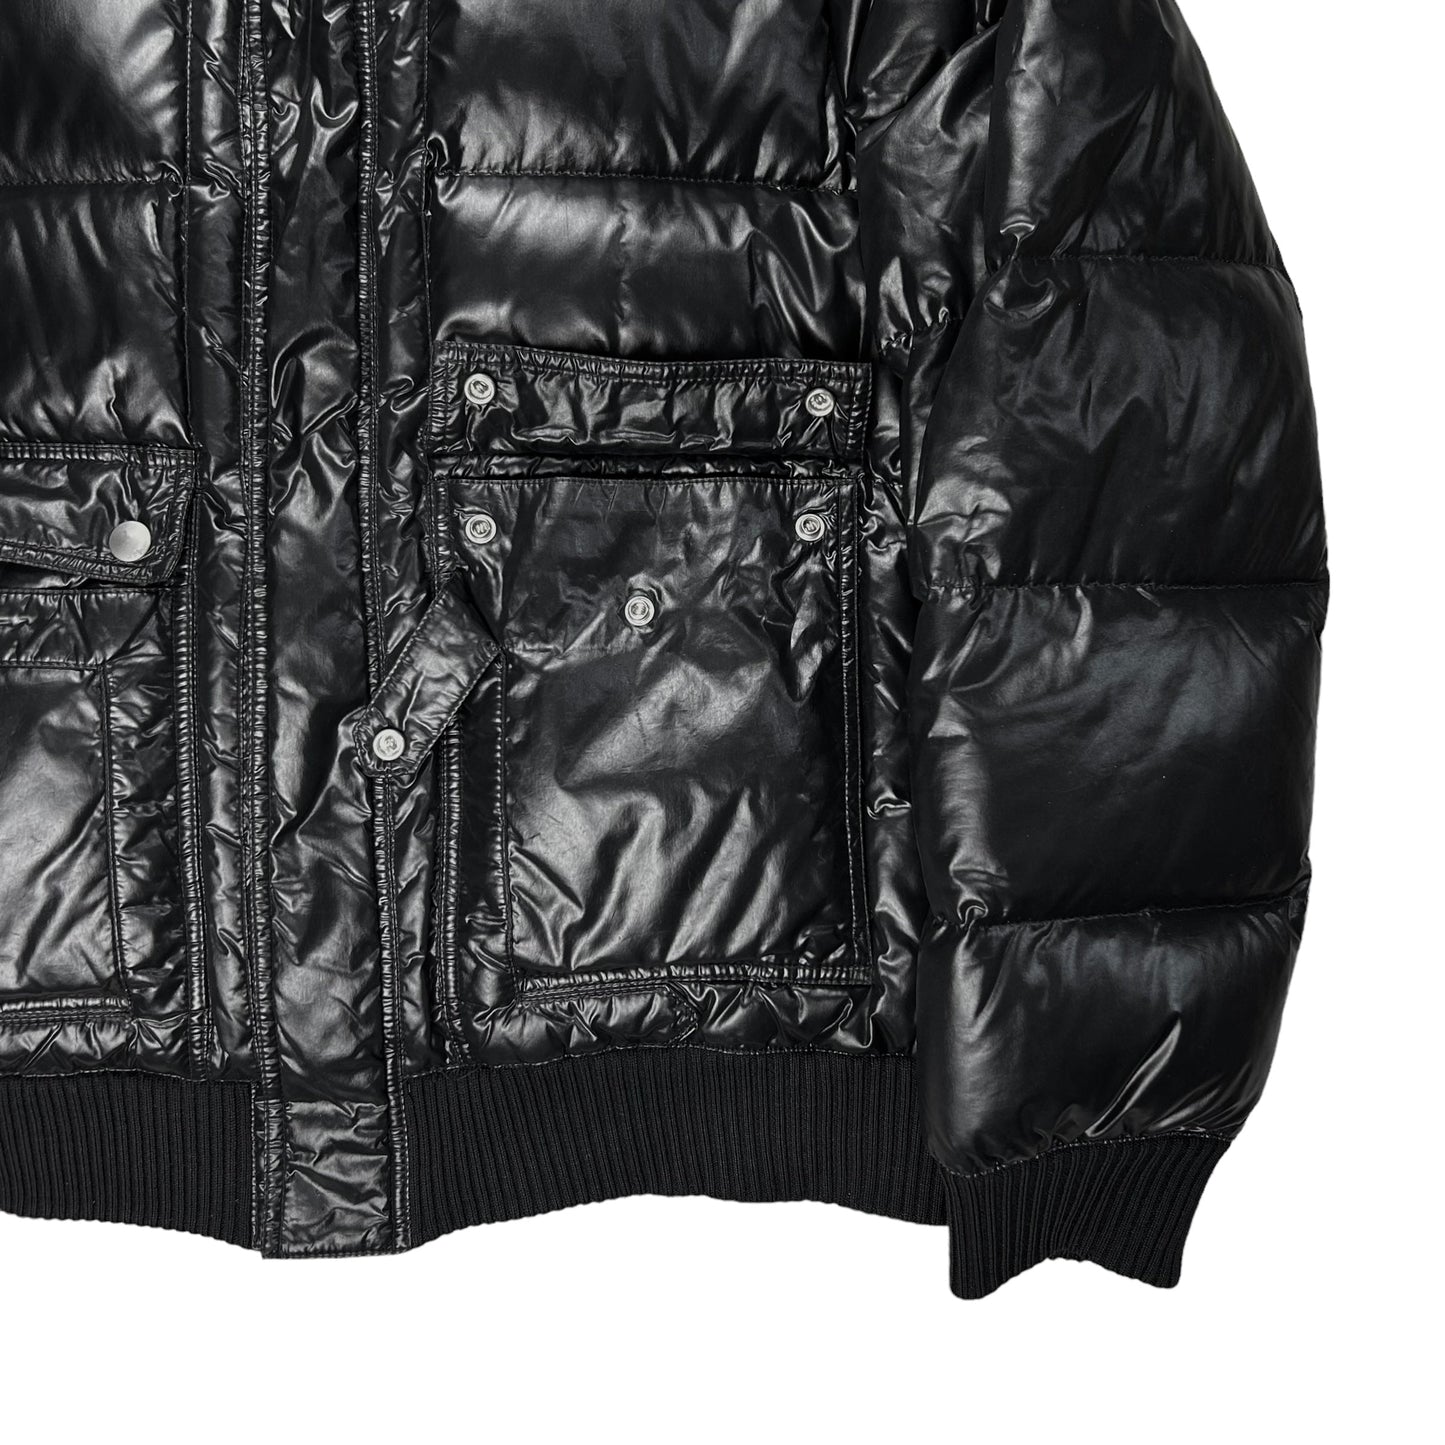 Dior Homme Glossy Navigate Puffer Jacket - AW08